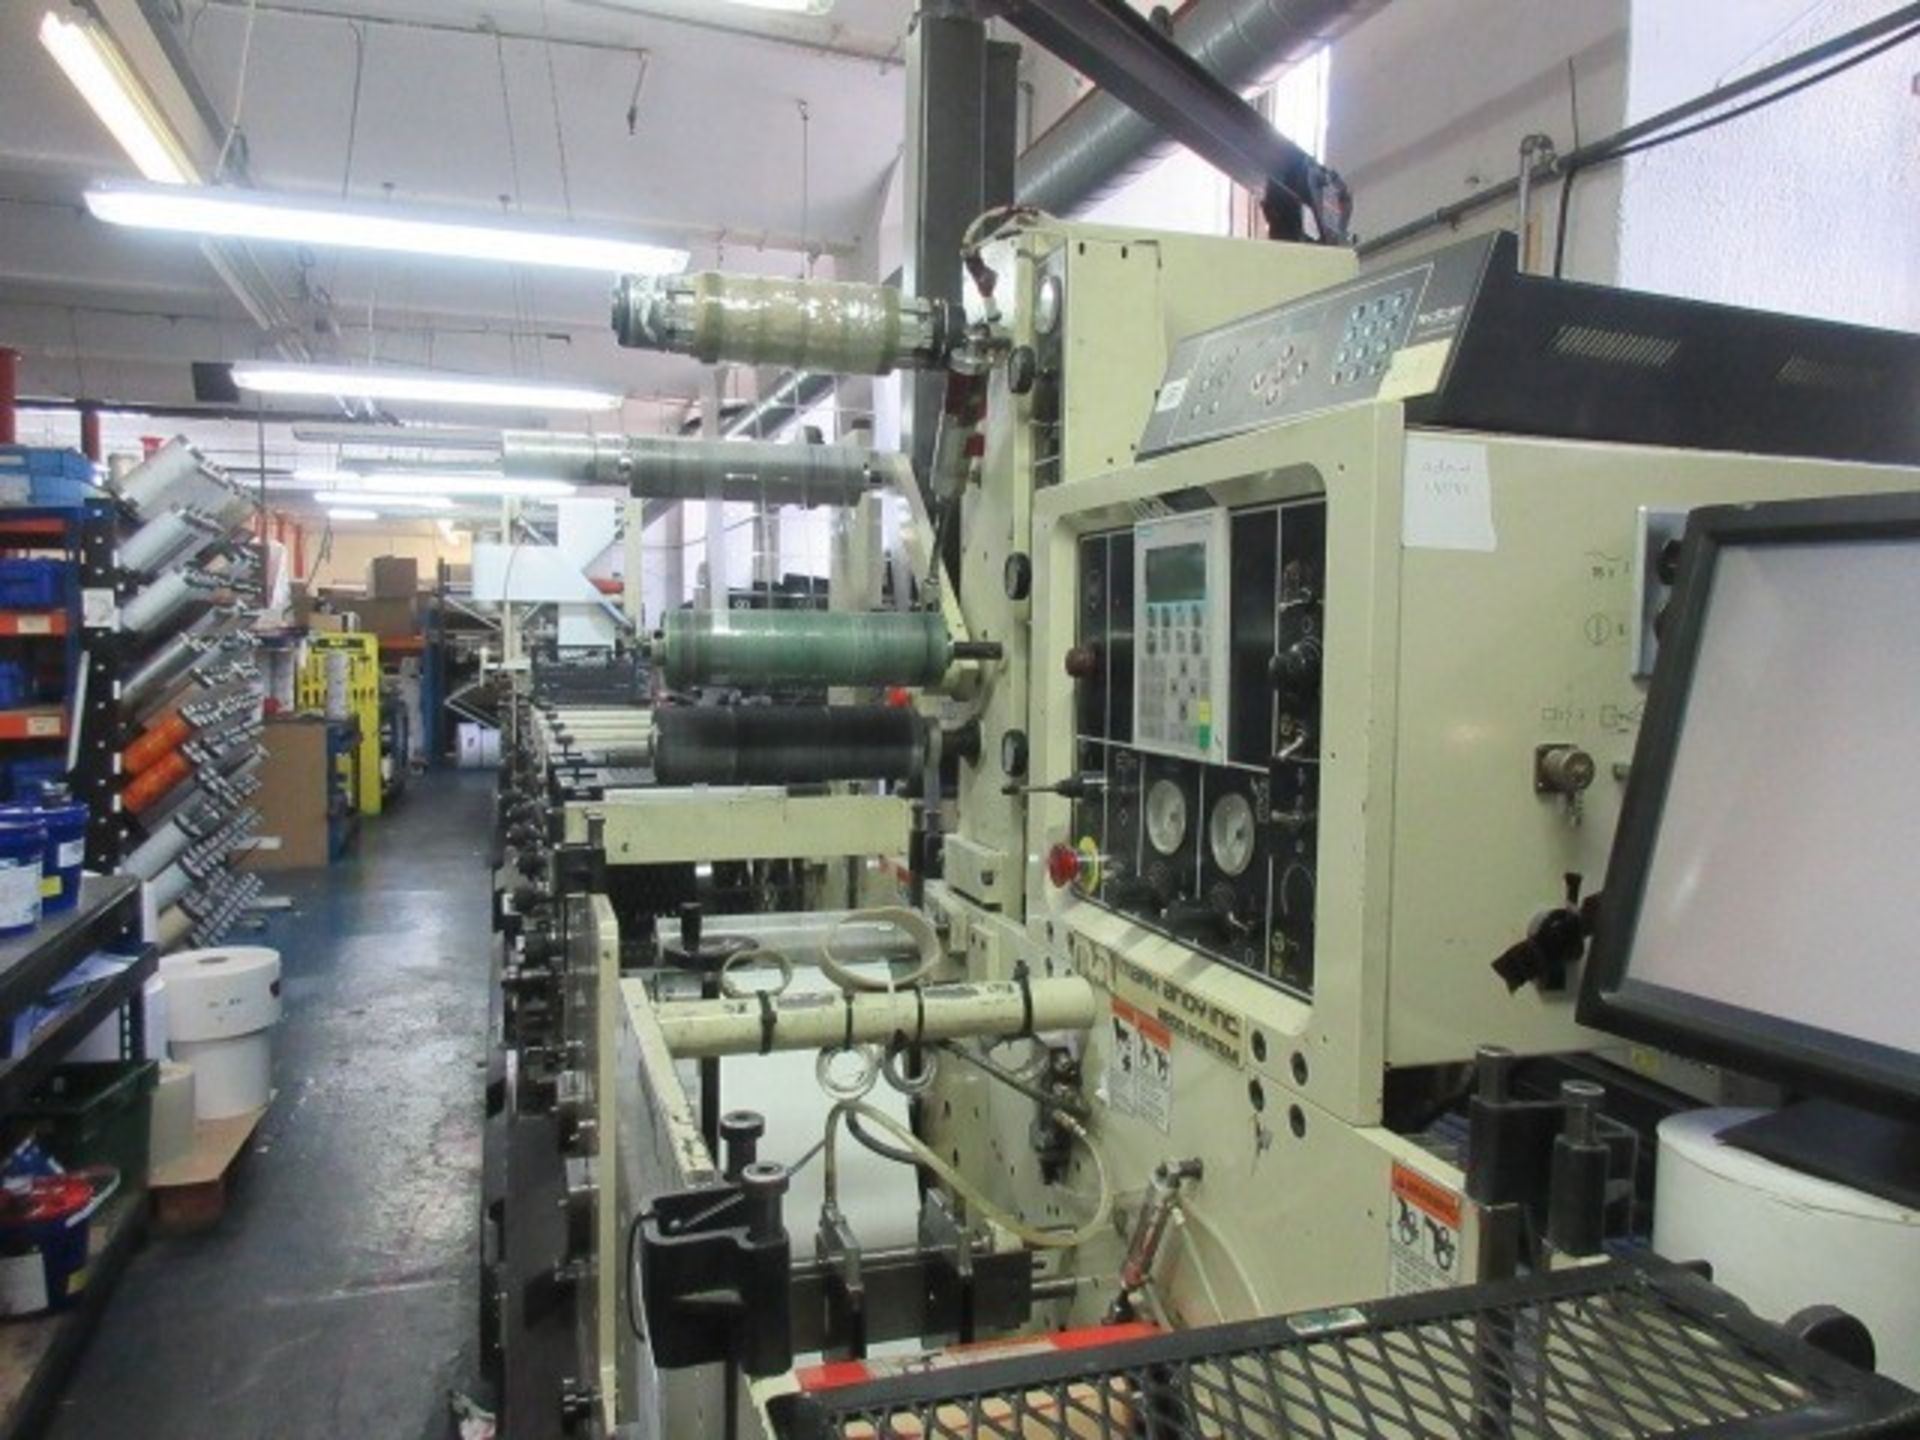 Mark Andy 2200-10F 10” 8 colour flexographic label printing press. Serial no: 1260086 (2002) - Image 86 of 383